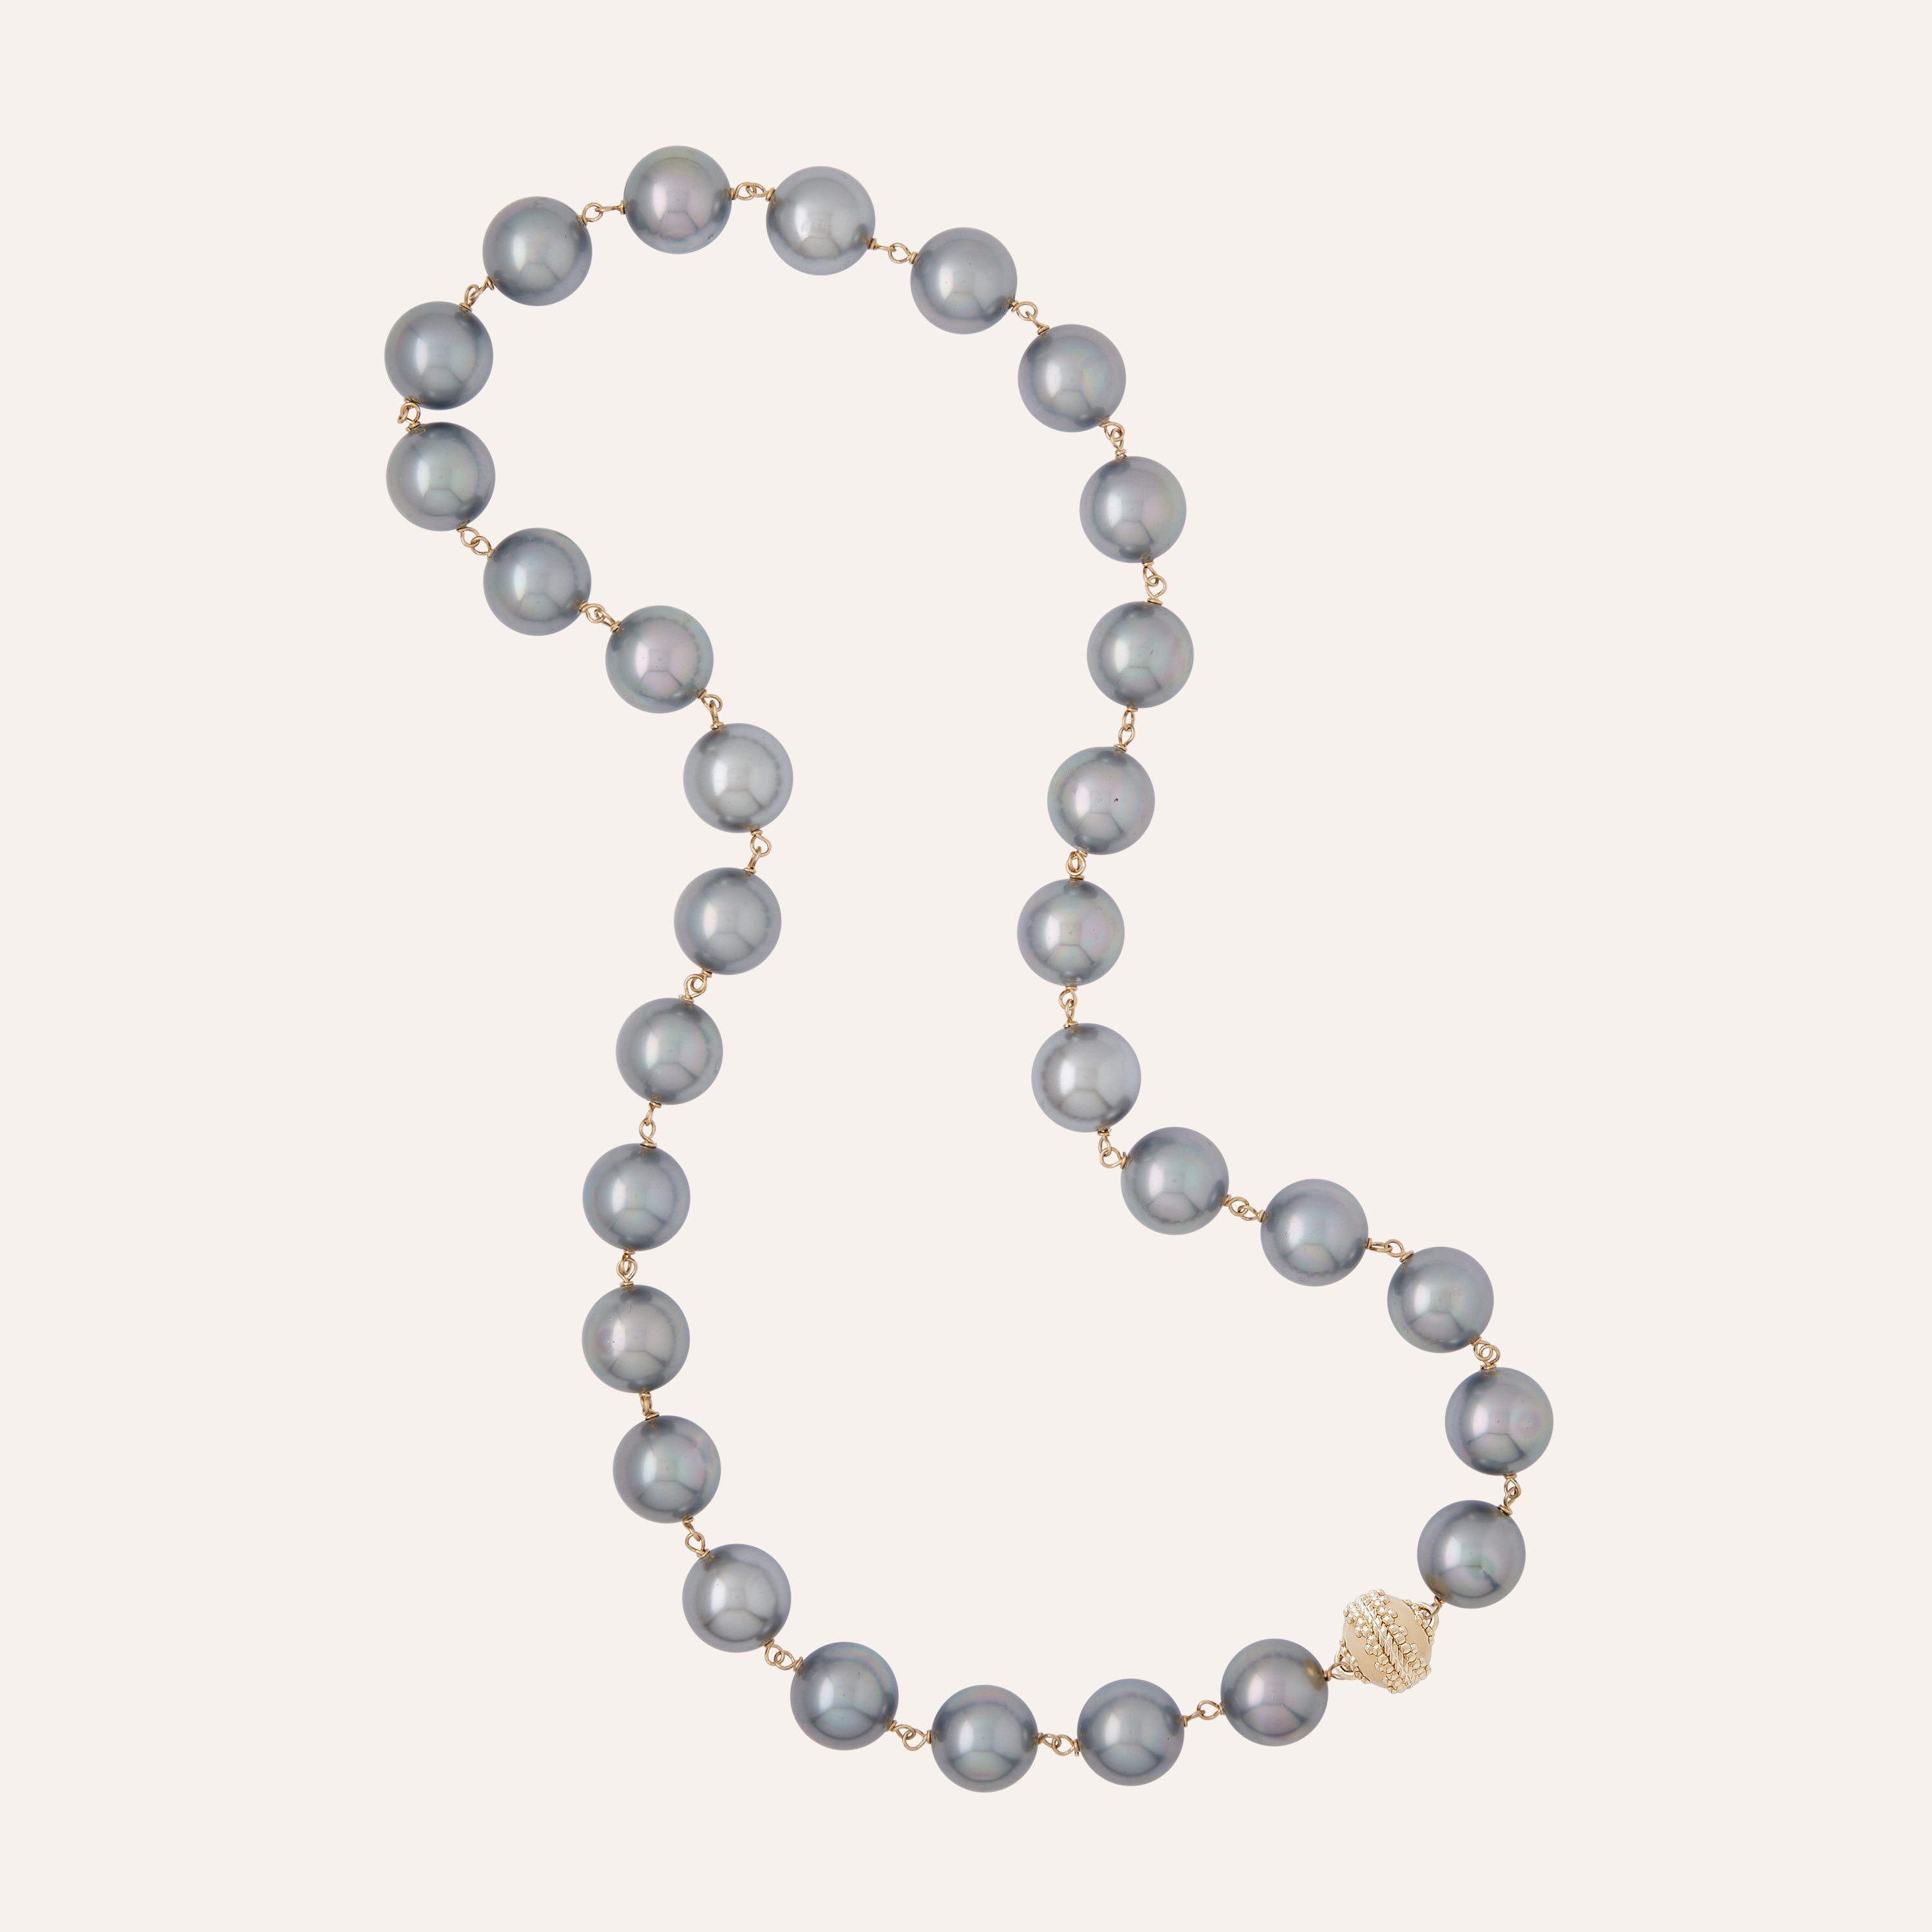 Caspian Victoire Gray Shell Pearl 16mm Necklace